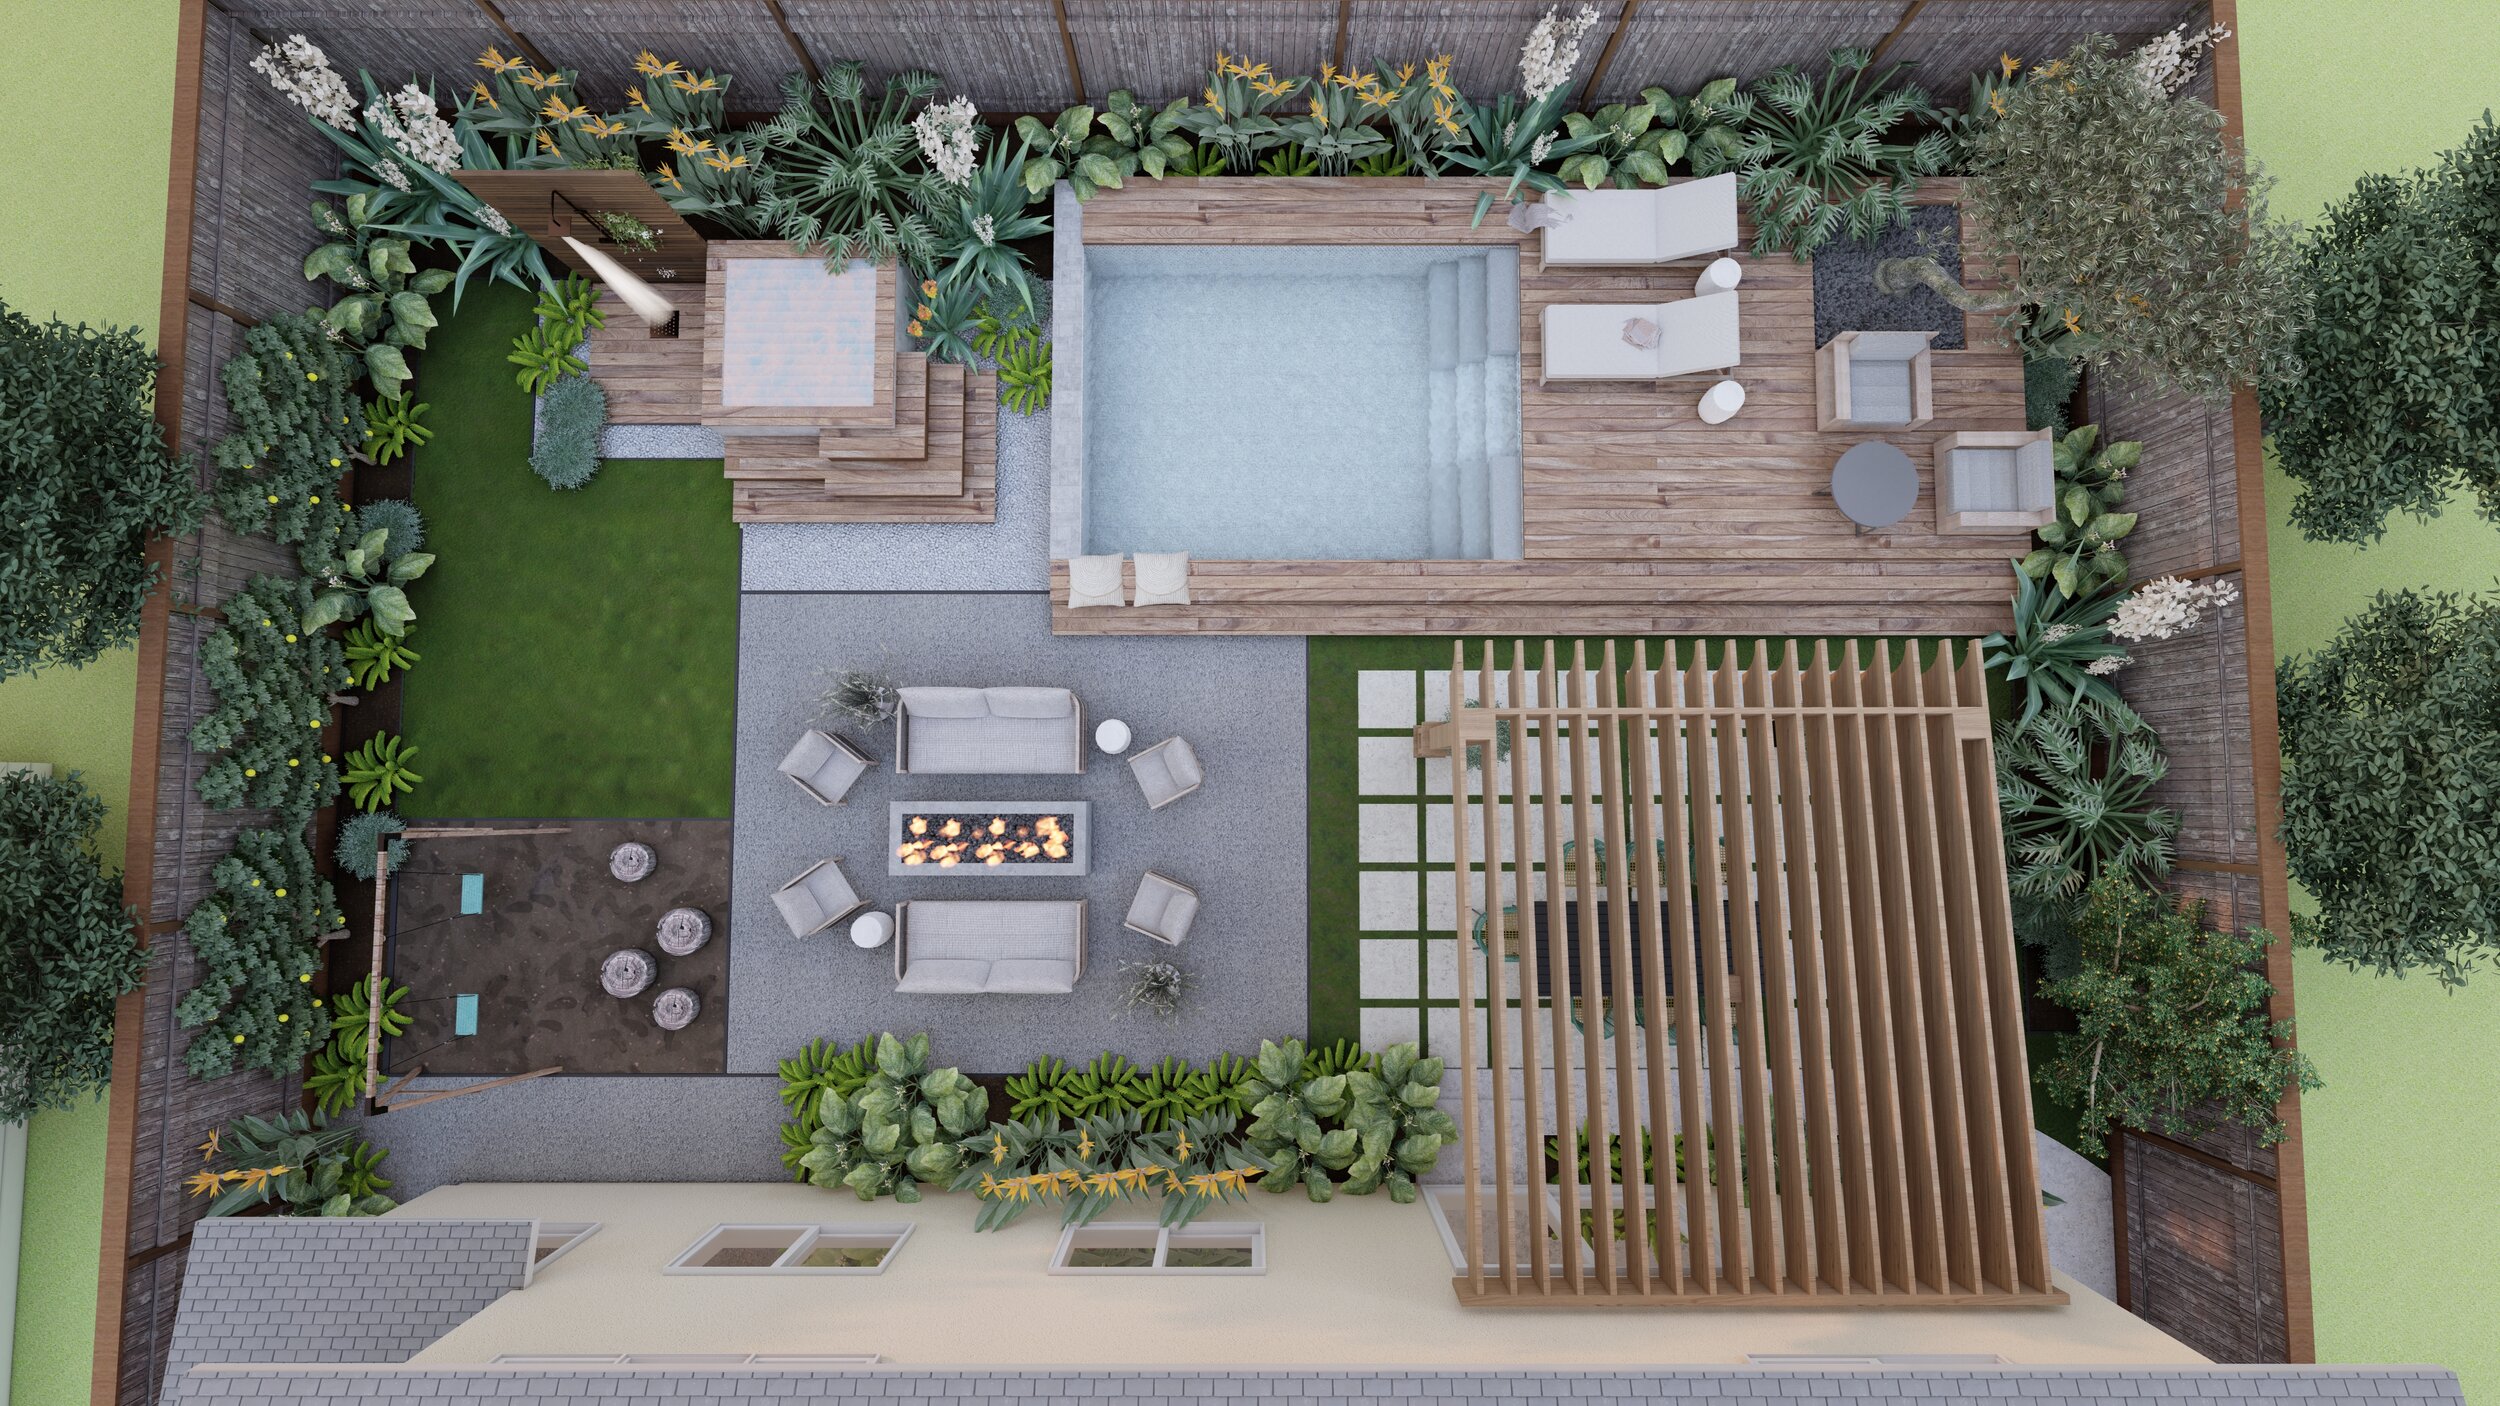 Overhead view of tropical backyard with fire pit, pergola, hot tub, outdoor shower, plunge pool and dining area